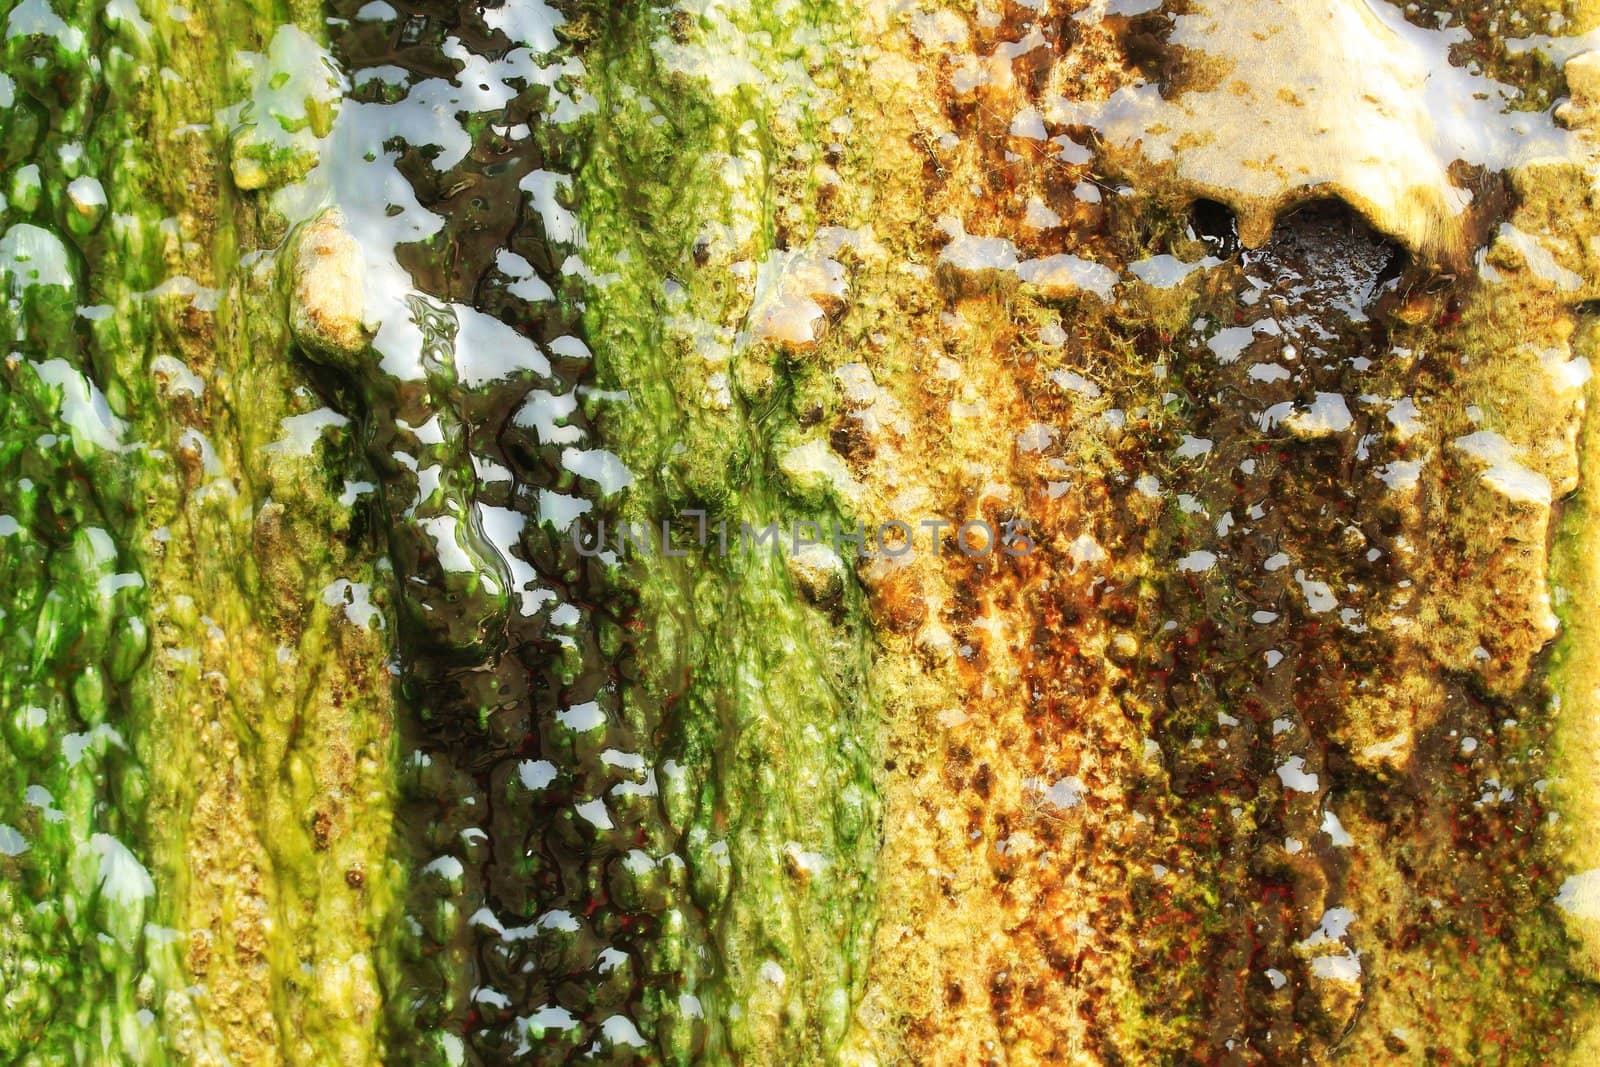 Algae growing on a wall completely covering its surface